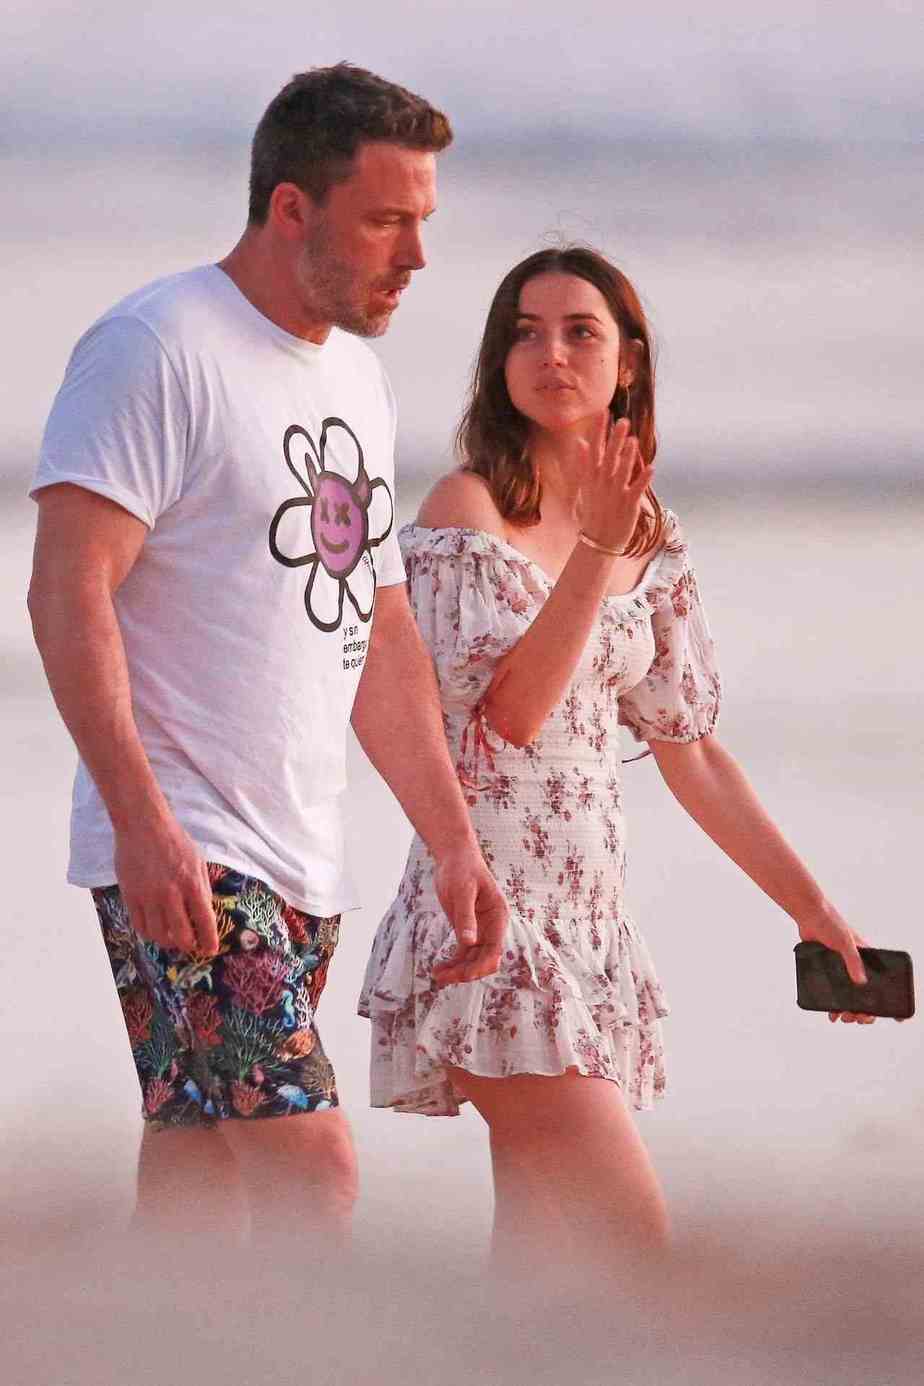 Ana De Armas with her ex-boyrfriend on a vacation to Costa-Rica back then.